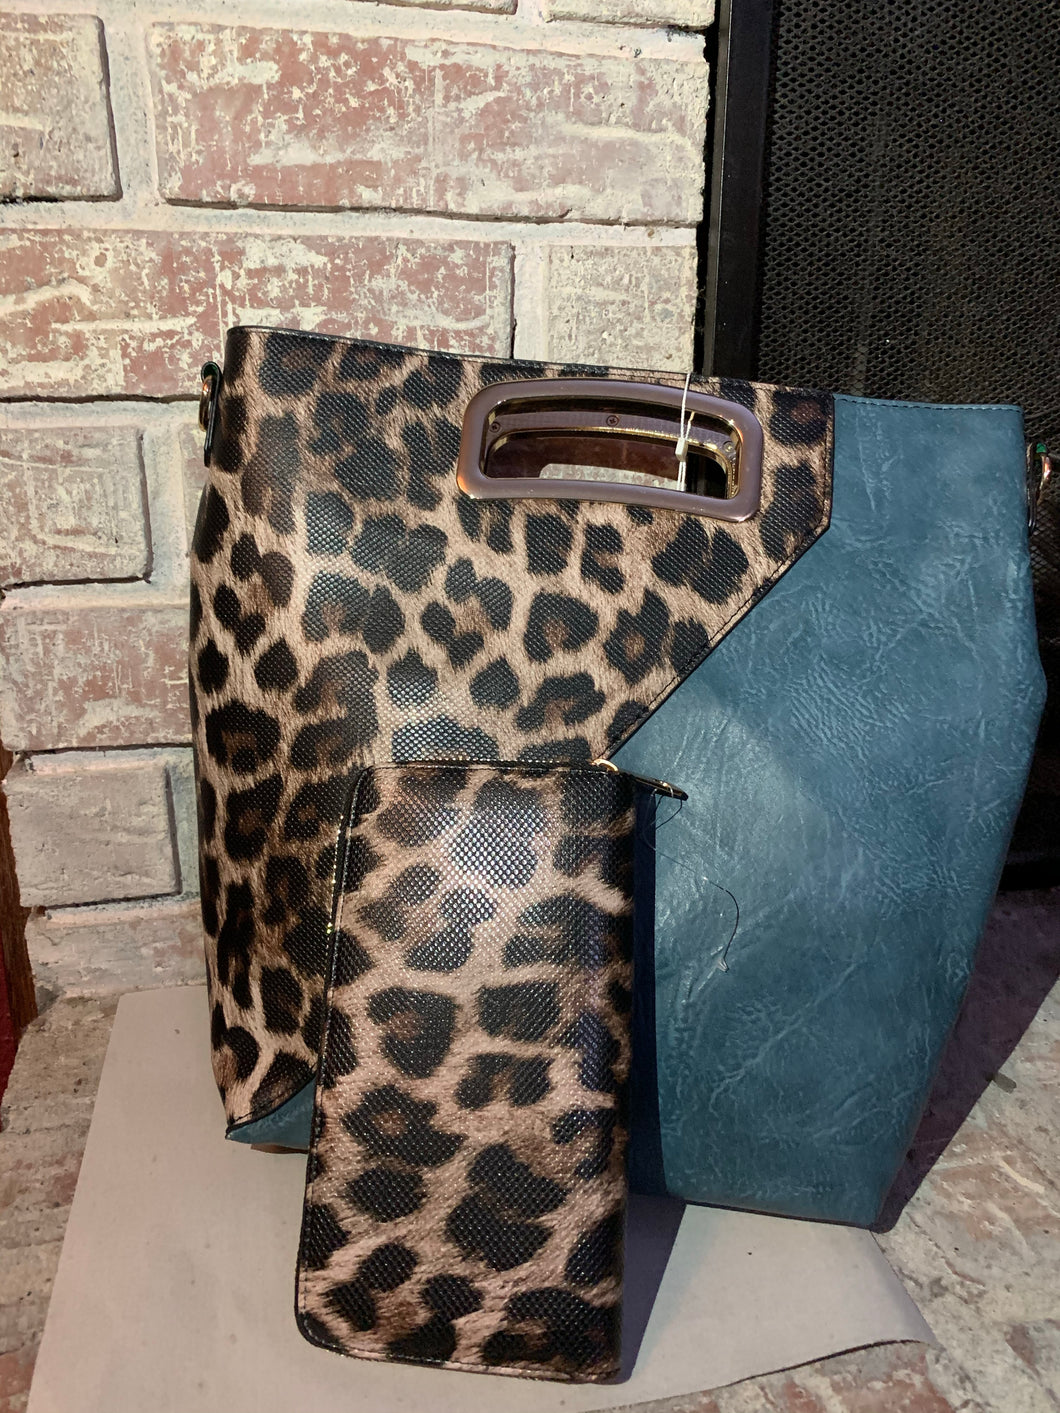 Cheetah print and blue purse with wallet